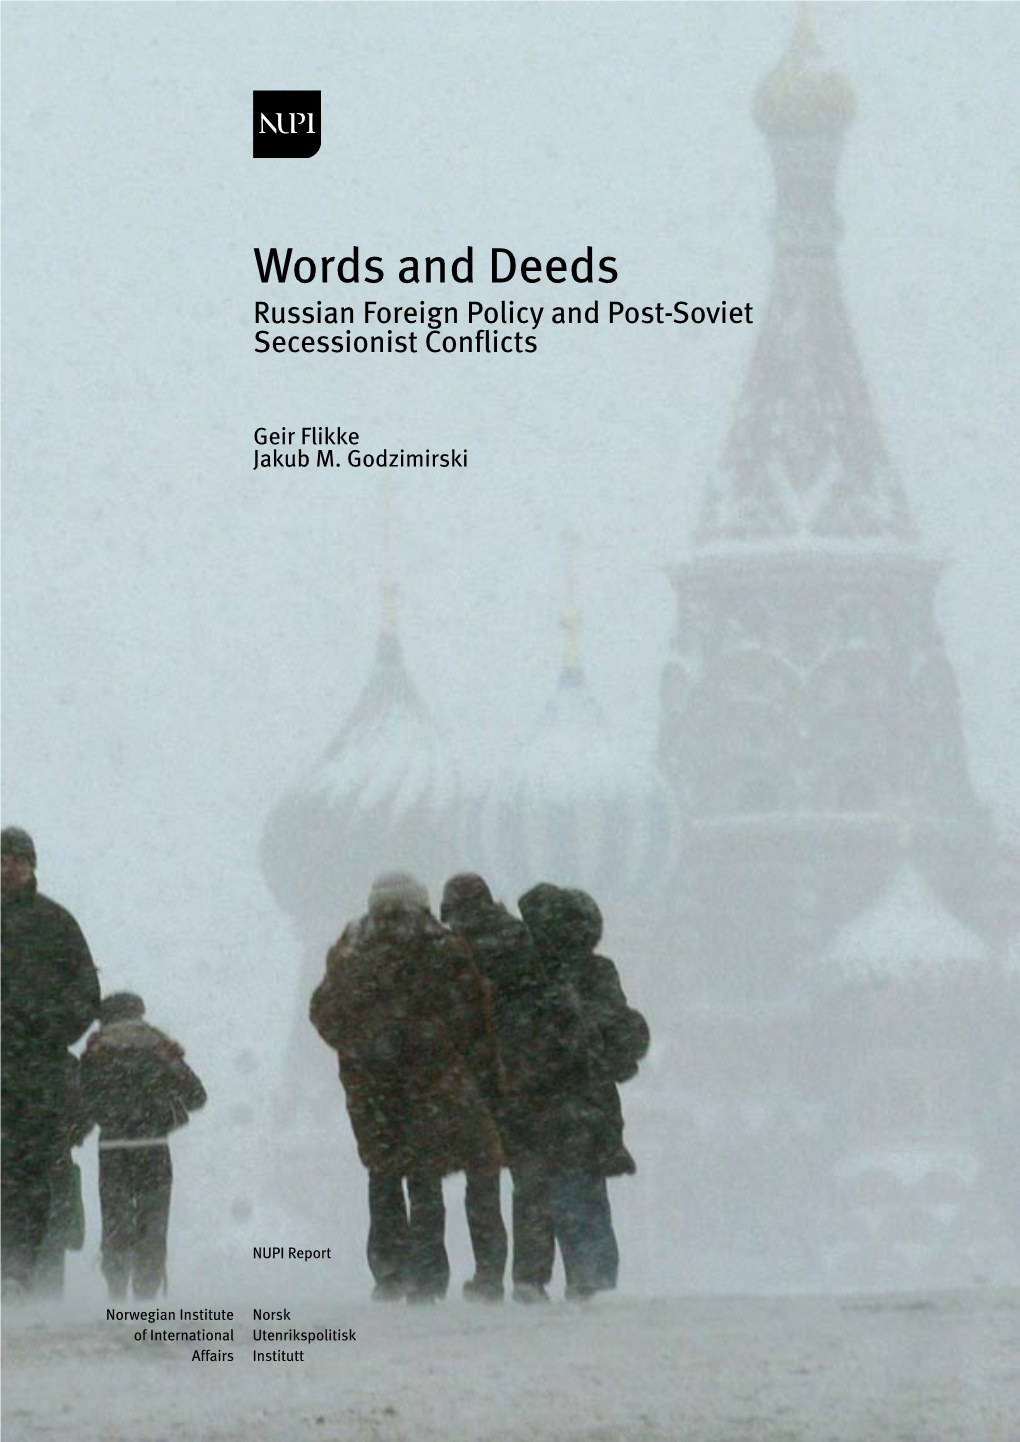 Words and Deeds: Russian Foreign Policy and Post-Soviet Secessionist